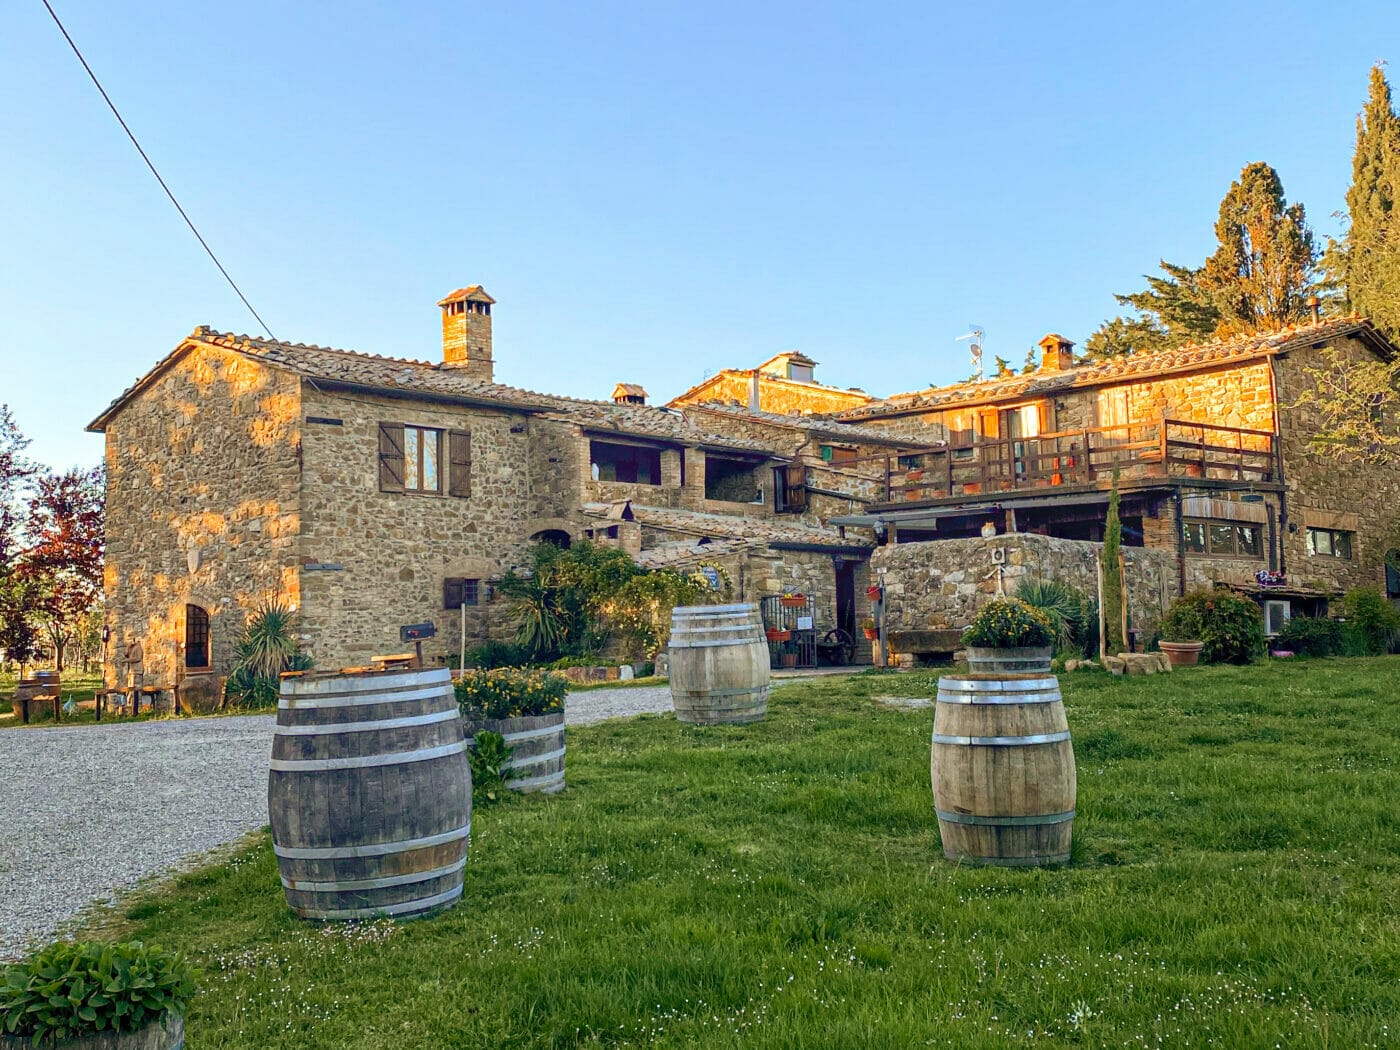 agriturismo il cocco bed and breakfast accomodation in tuscany - beautiful villa in the midst of nature with wine barrels in the front